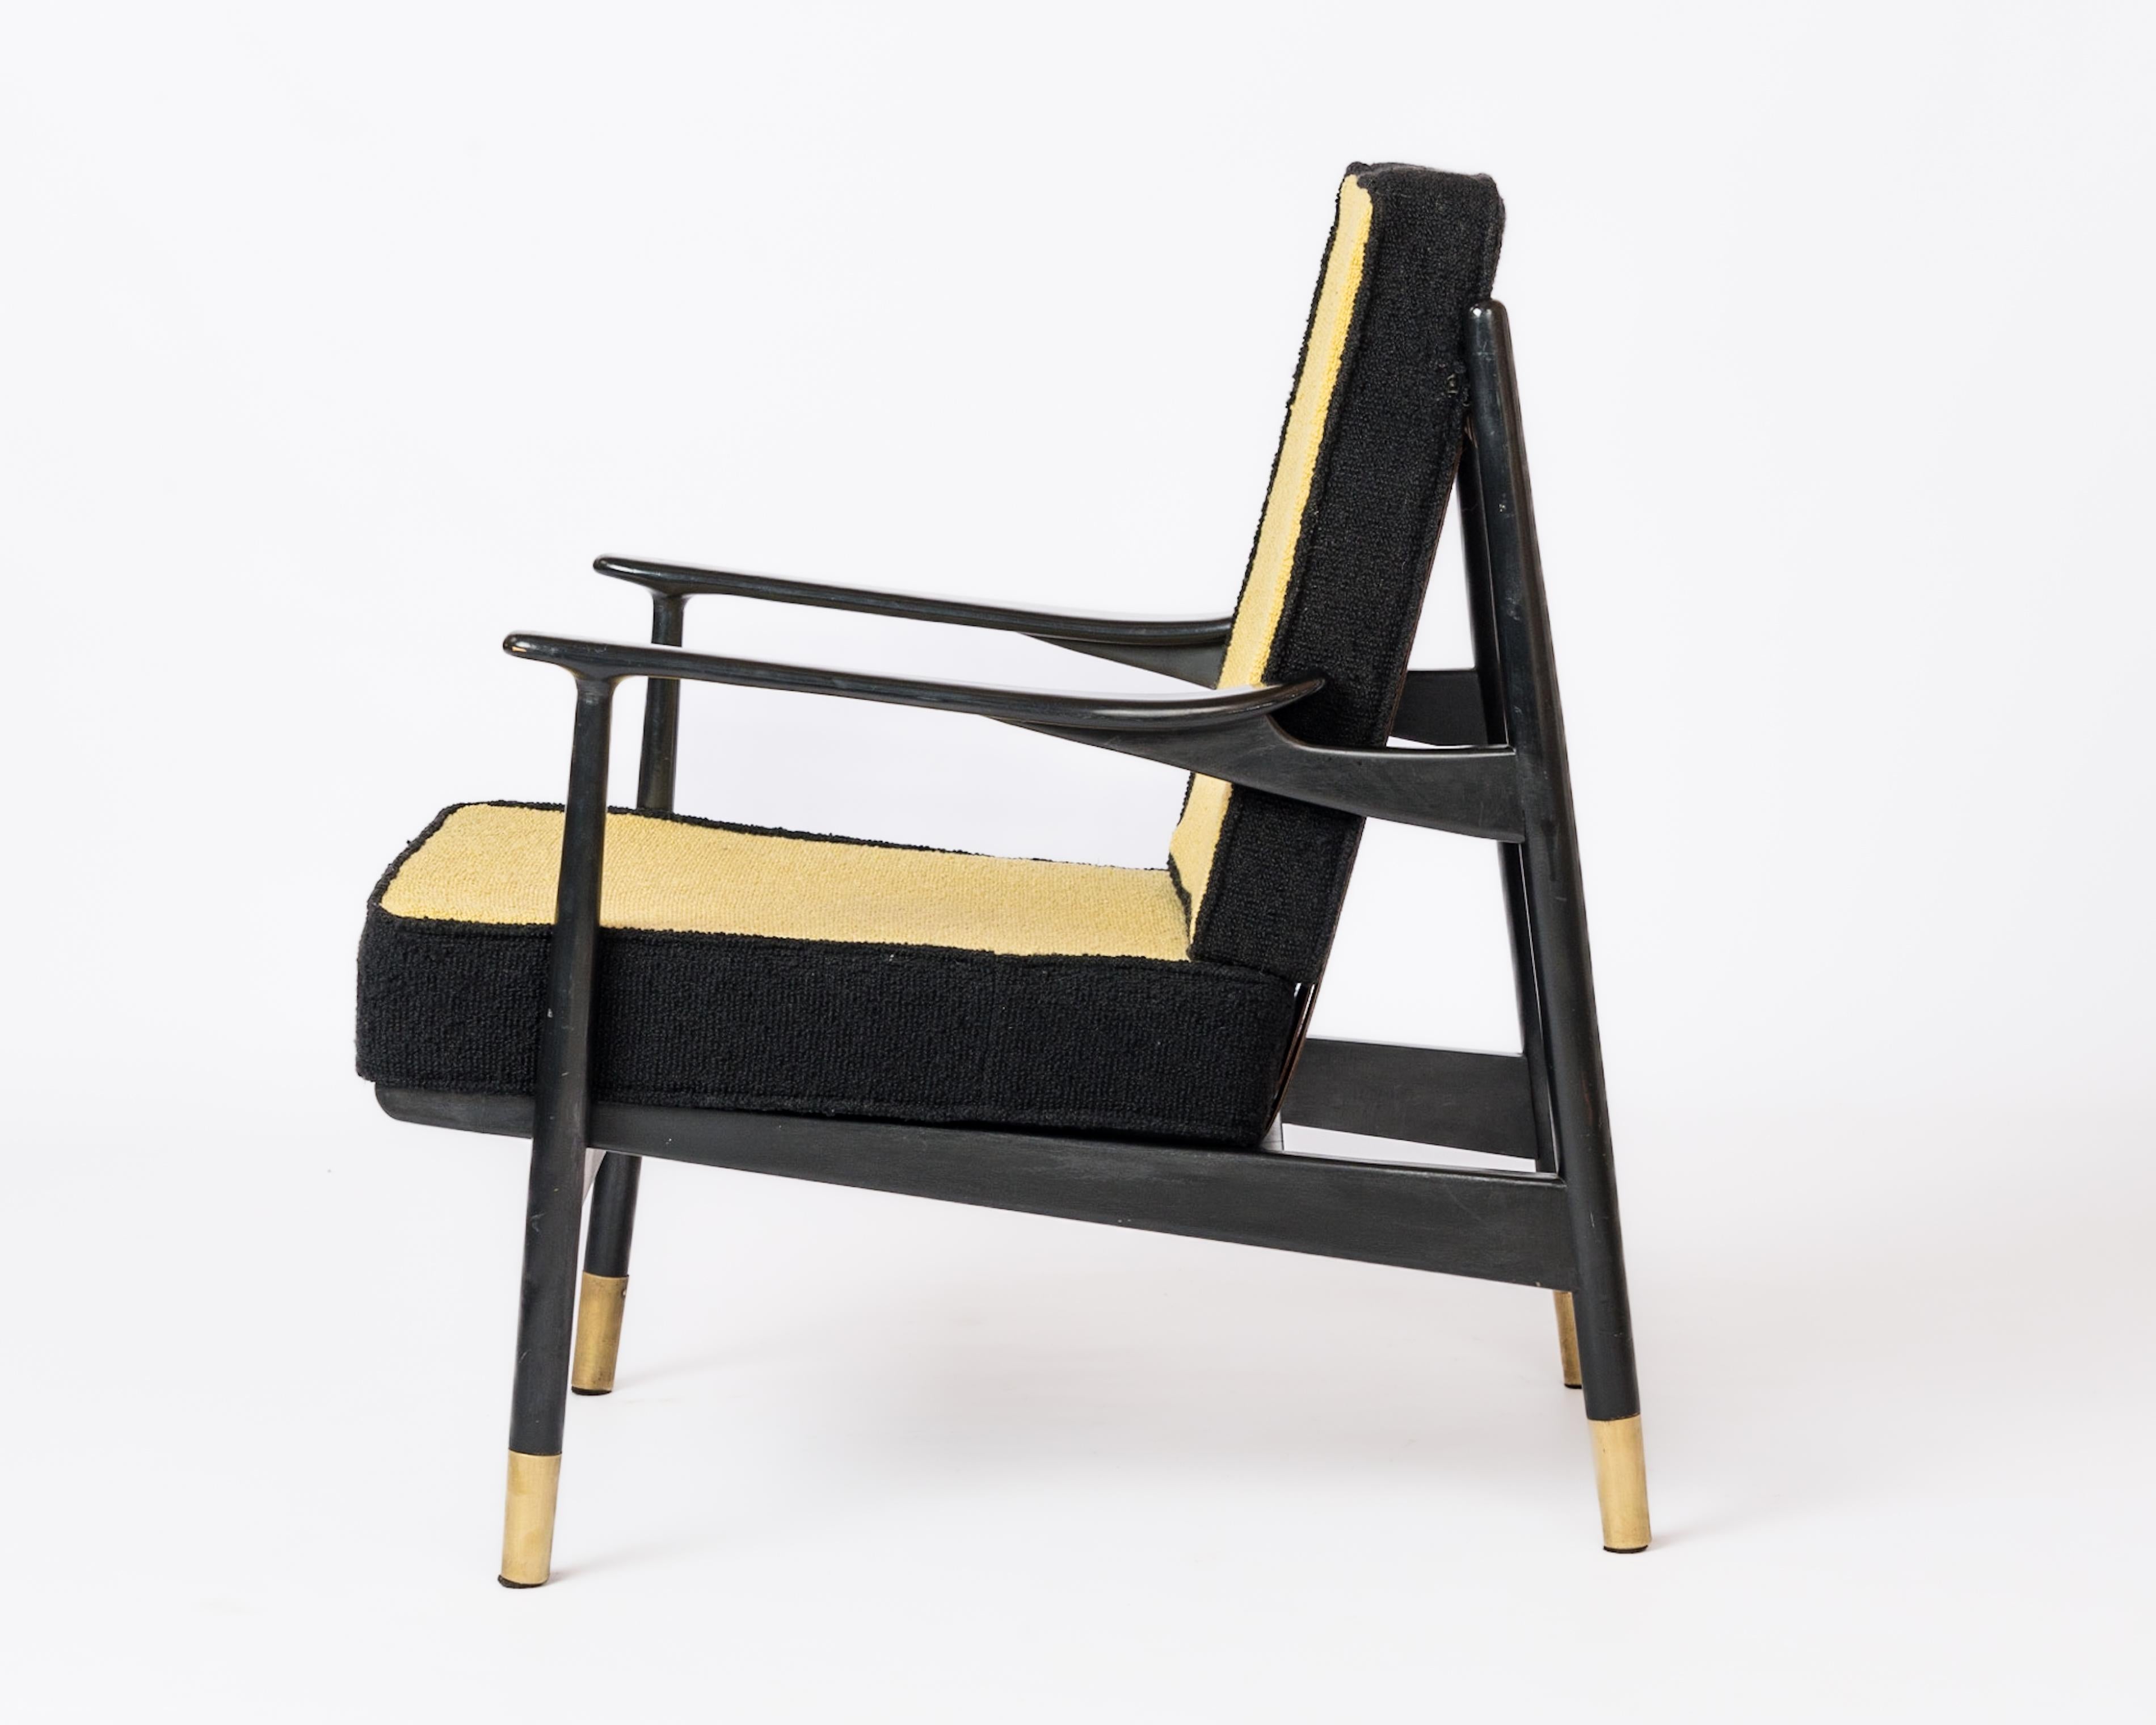 Unique black lacquered wood 1960's armchair in the style of Gio Ponti with brass feet and leather backrest straps.
Original two tone upholstery.
In fair vintage condition with some markings on armrests and some stains on leather straps.
This chair